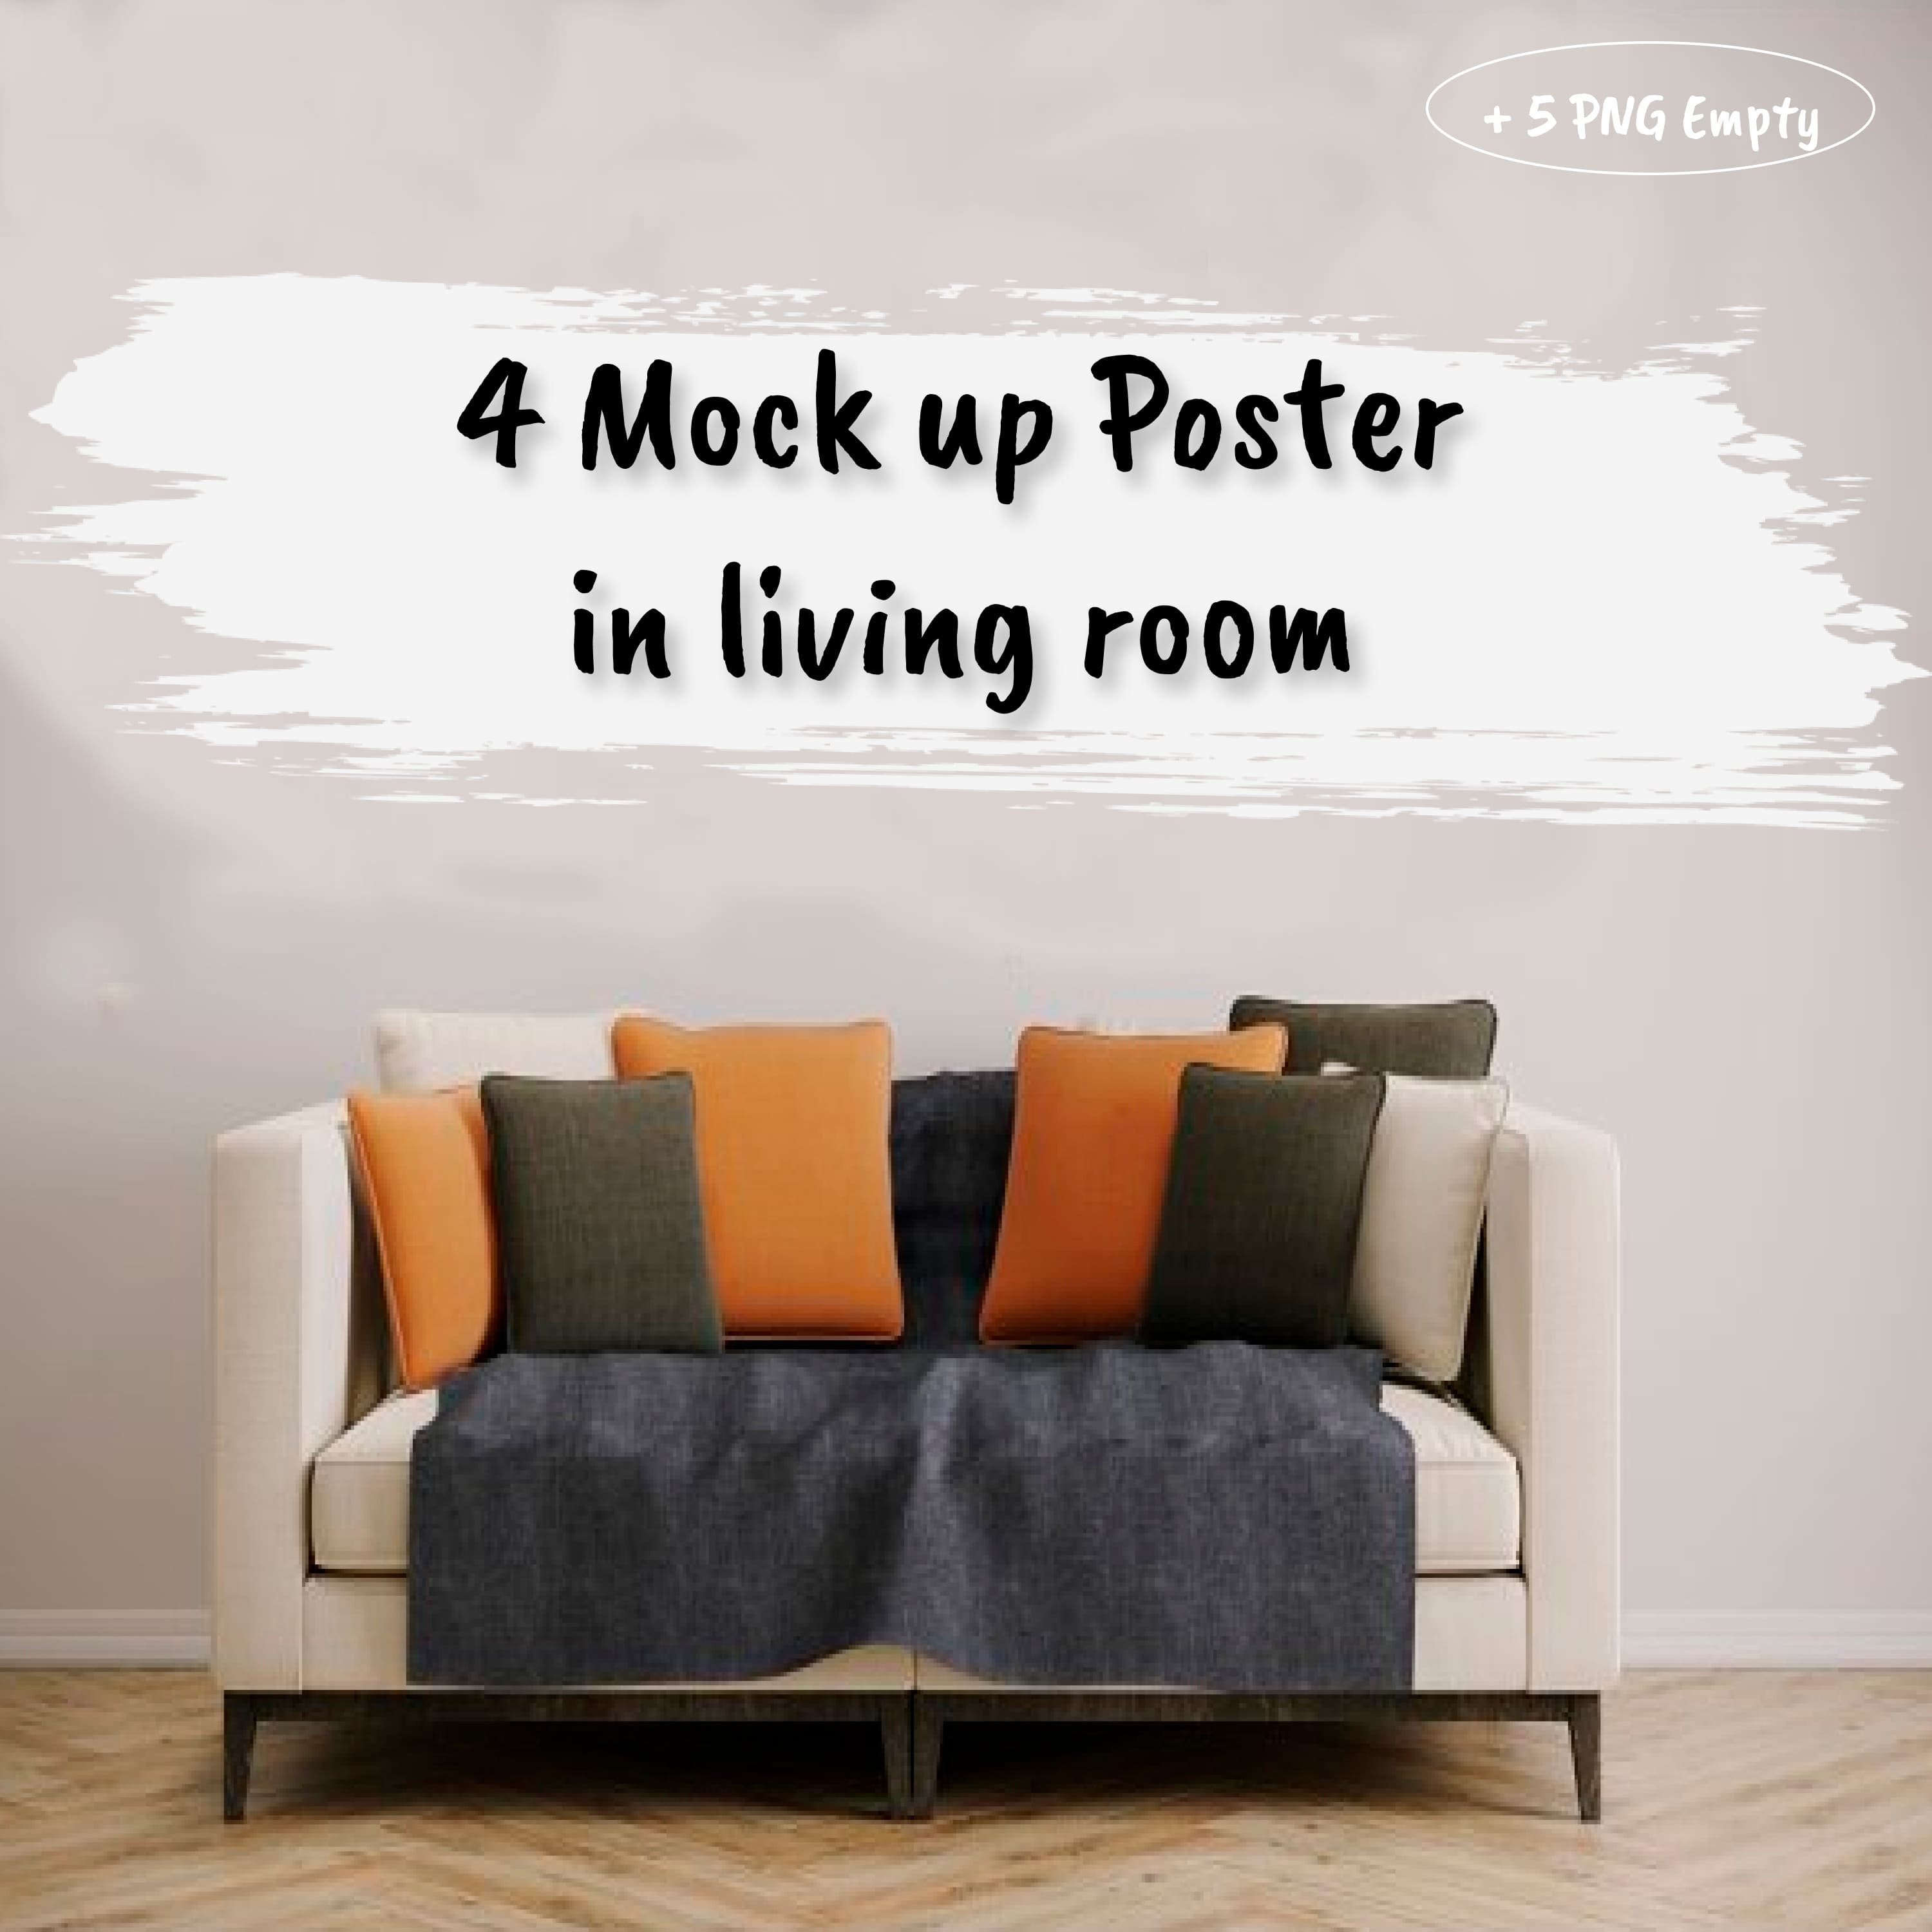 4 Mock up Poster in living room.